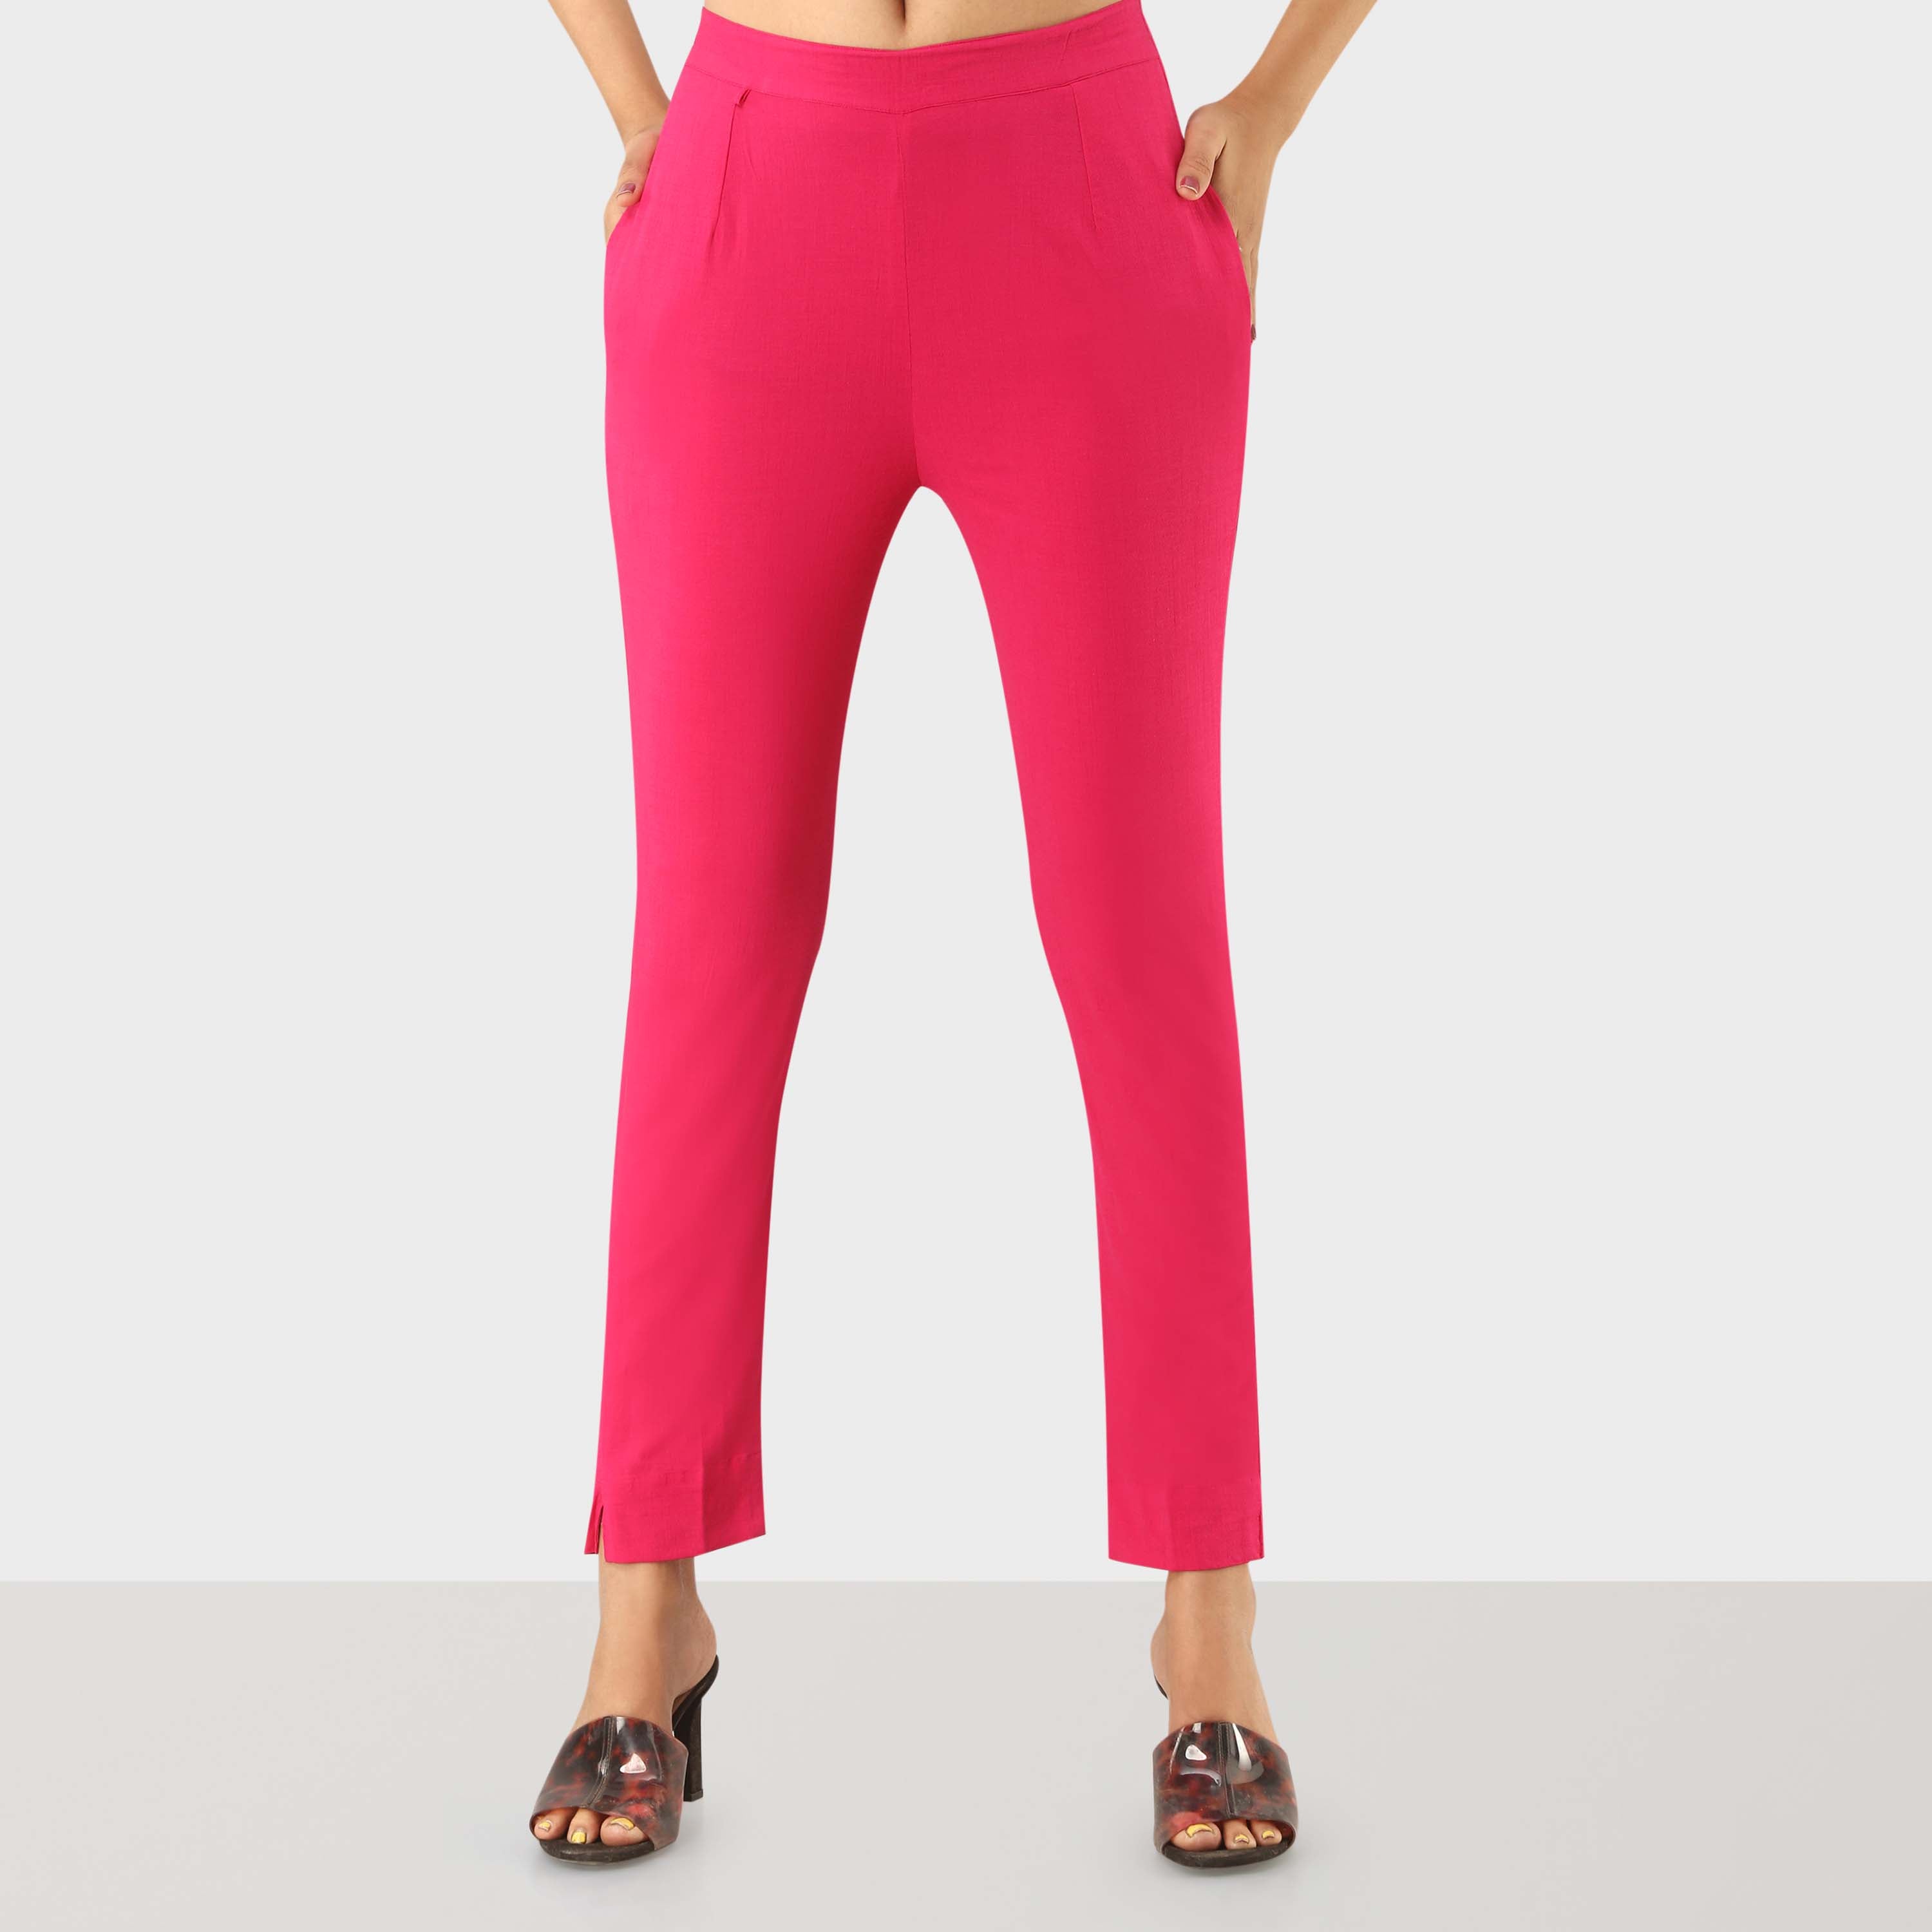 Buy Pink Four Pocket Cargo Pants Pure Cotton for Best Price, Reviews, Free  Shipping